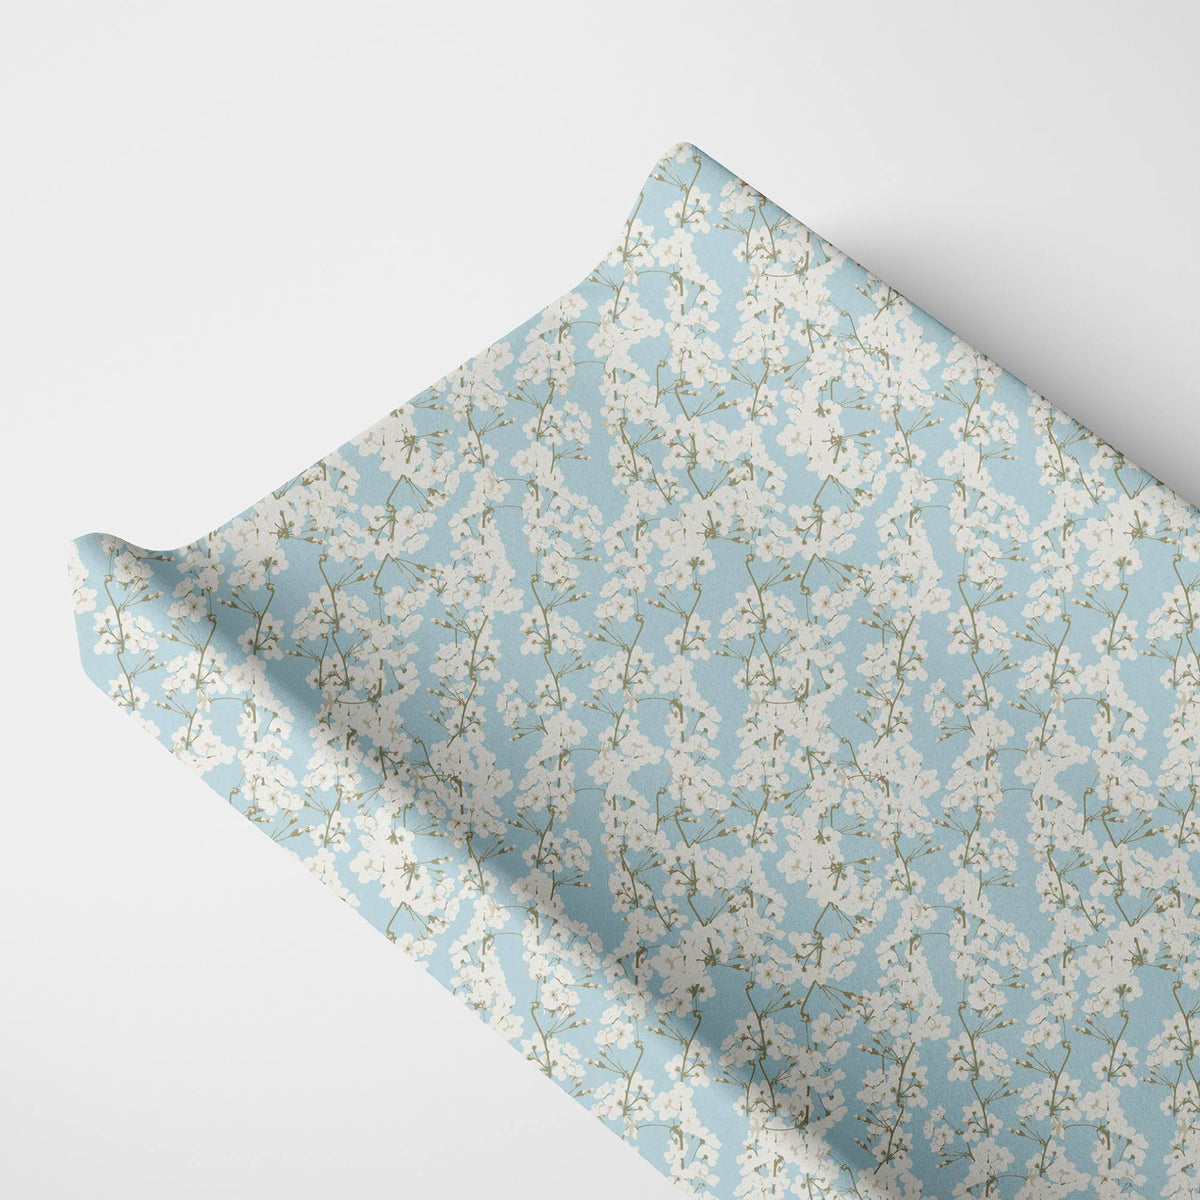 Norani Baby Changing Pad Cover in blue and white cherry blossom flowers